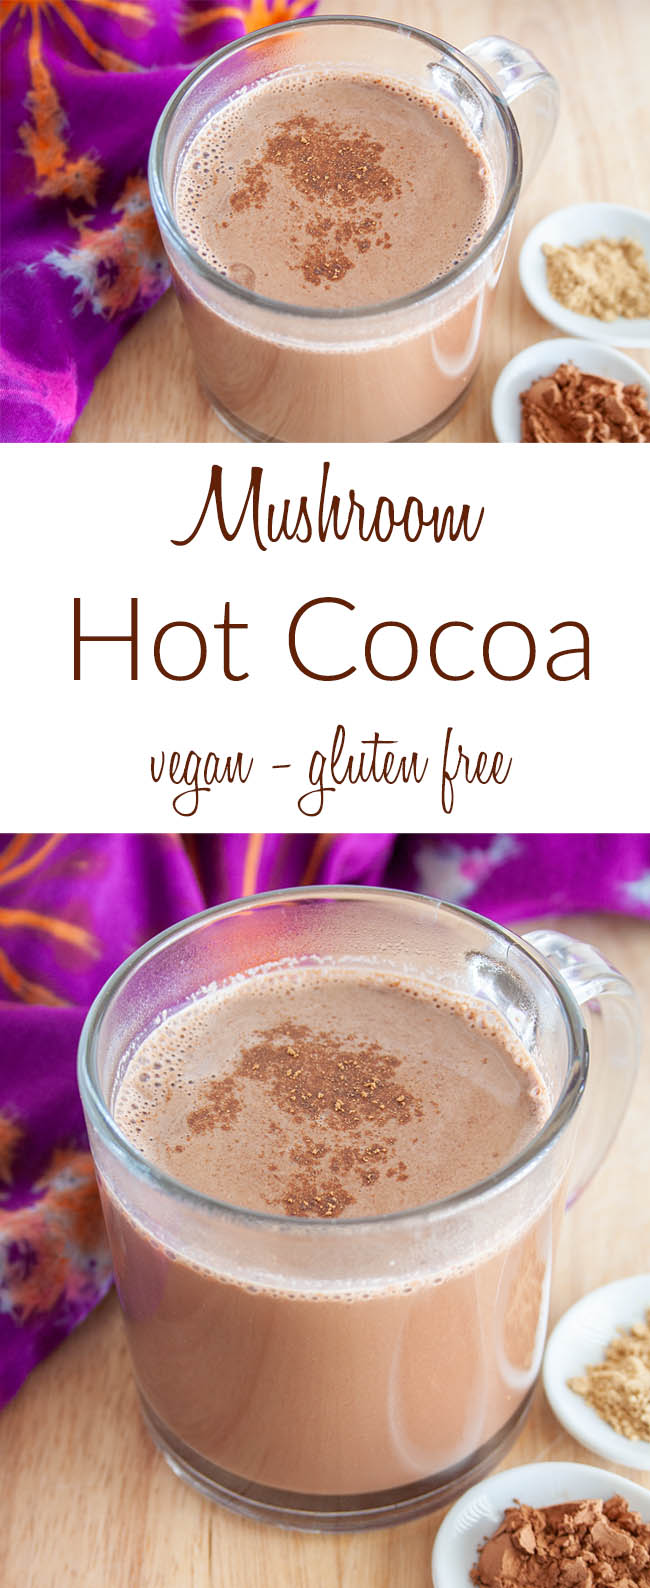 Mushroom Hot Cocoa collage photo with text.